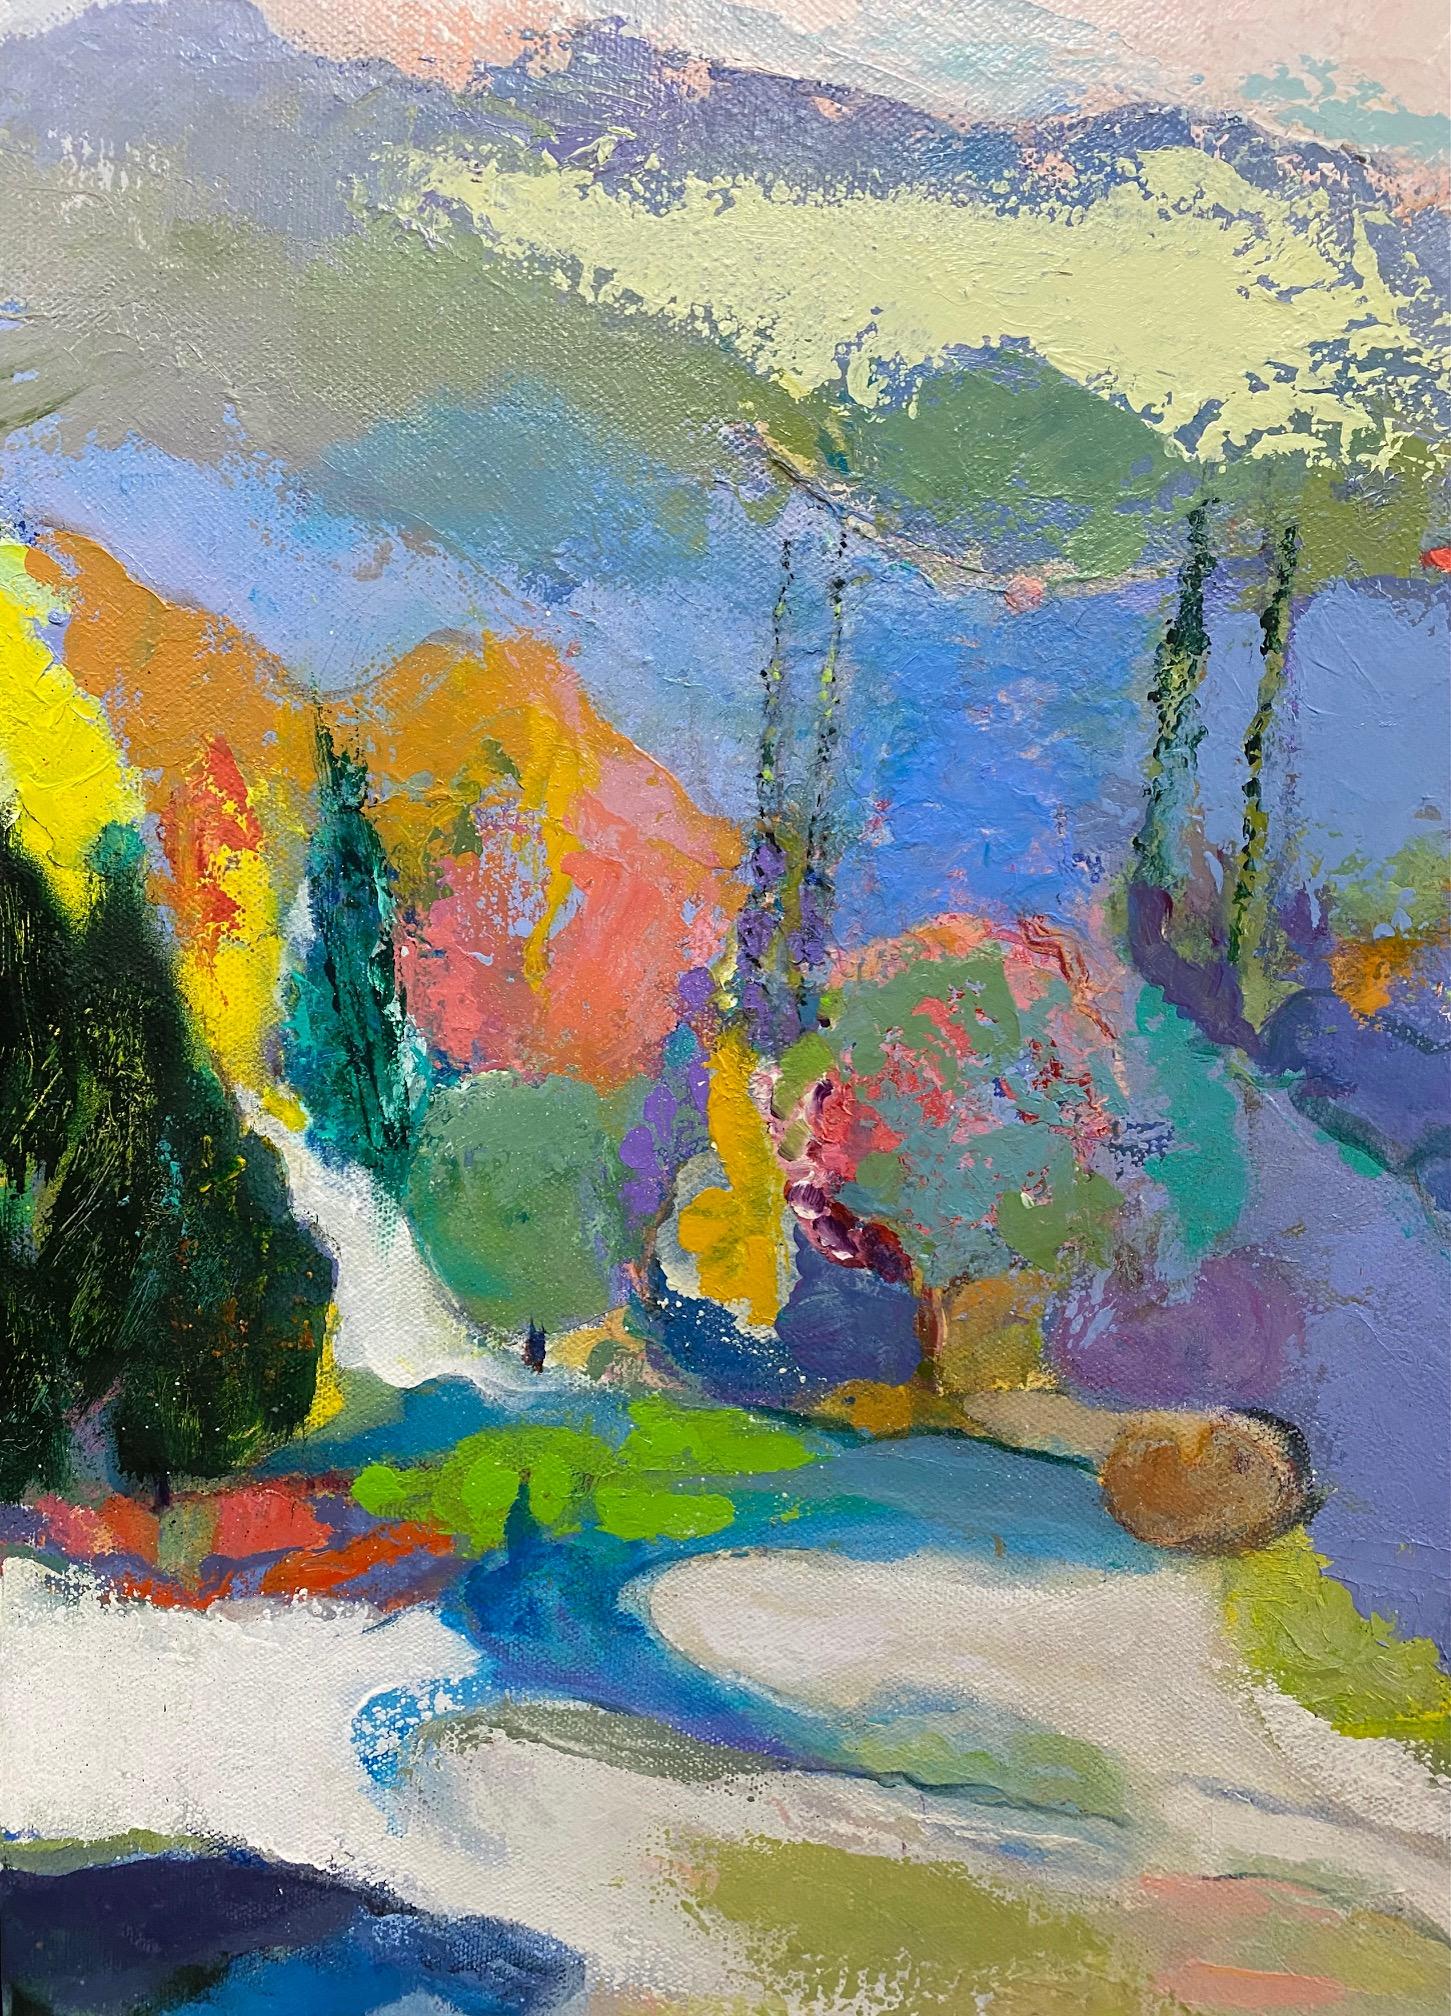 Lake Como, Italy, really is of superior luxury down to the very details;  it meanders through wishes and dreams of exotic hues, textures and nuances.  Artist Carol Carpenter's abstract expressionist work reflects her desire to touch the human soul